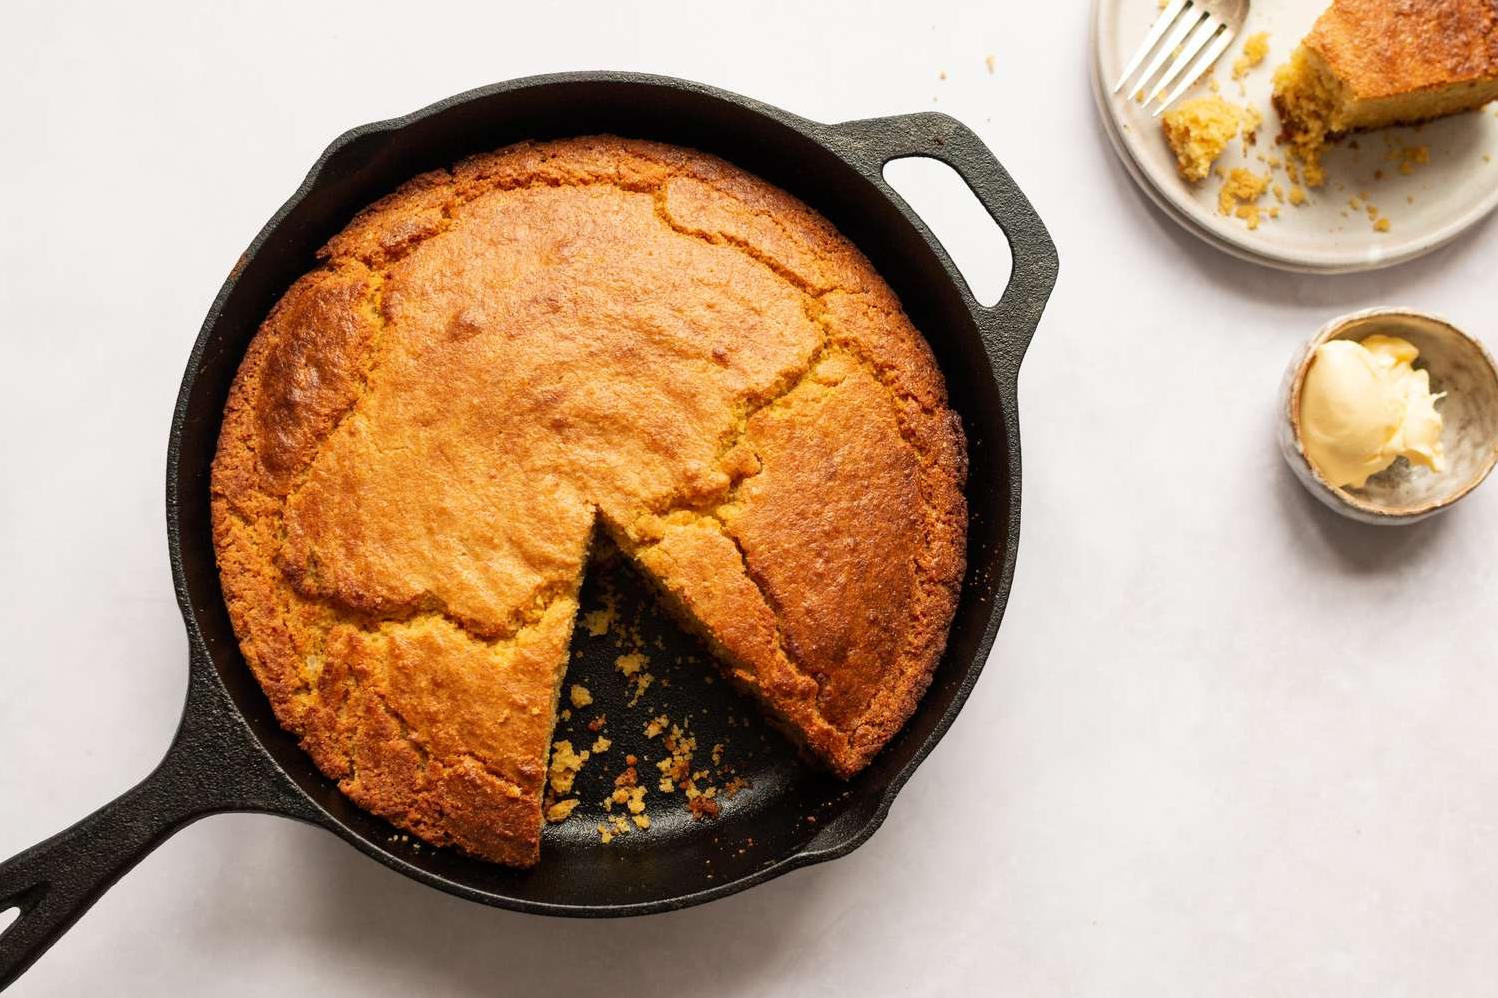  Golden-brown and crispy Southern-style skillet cornbread.